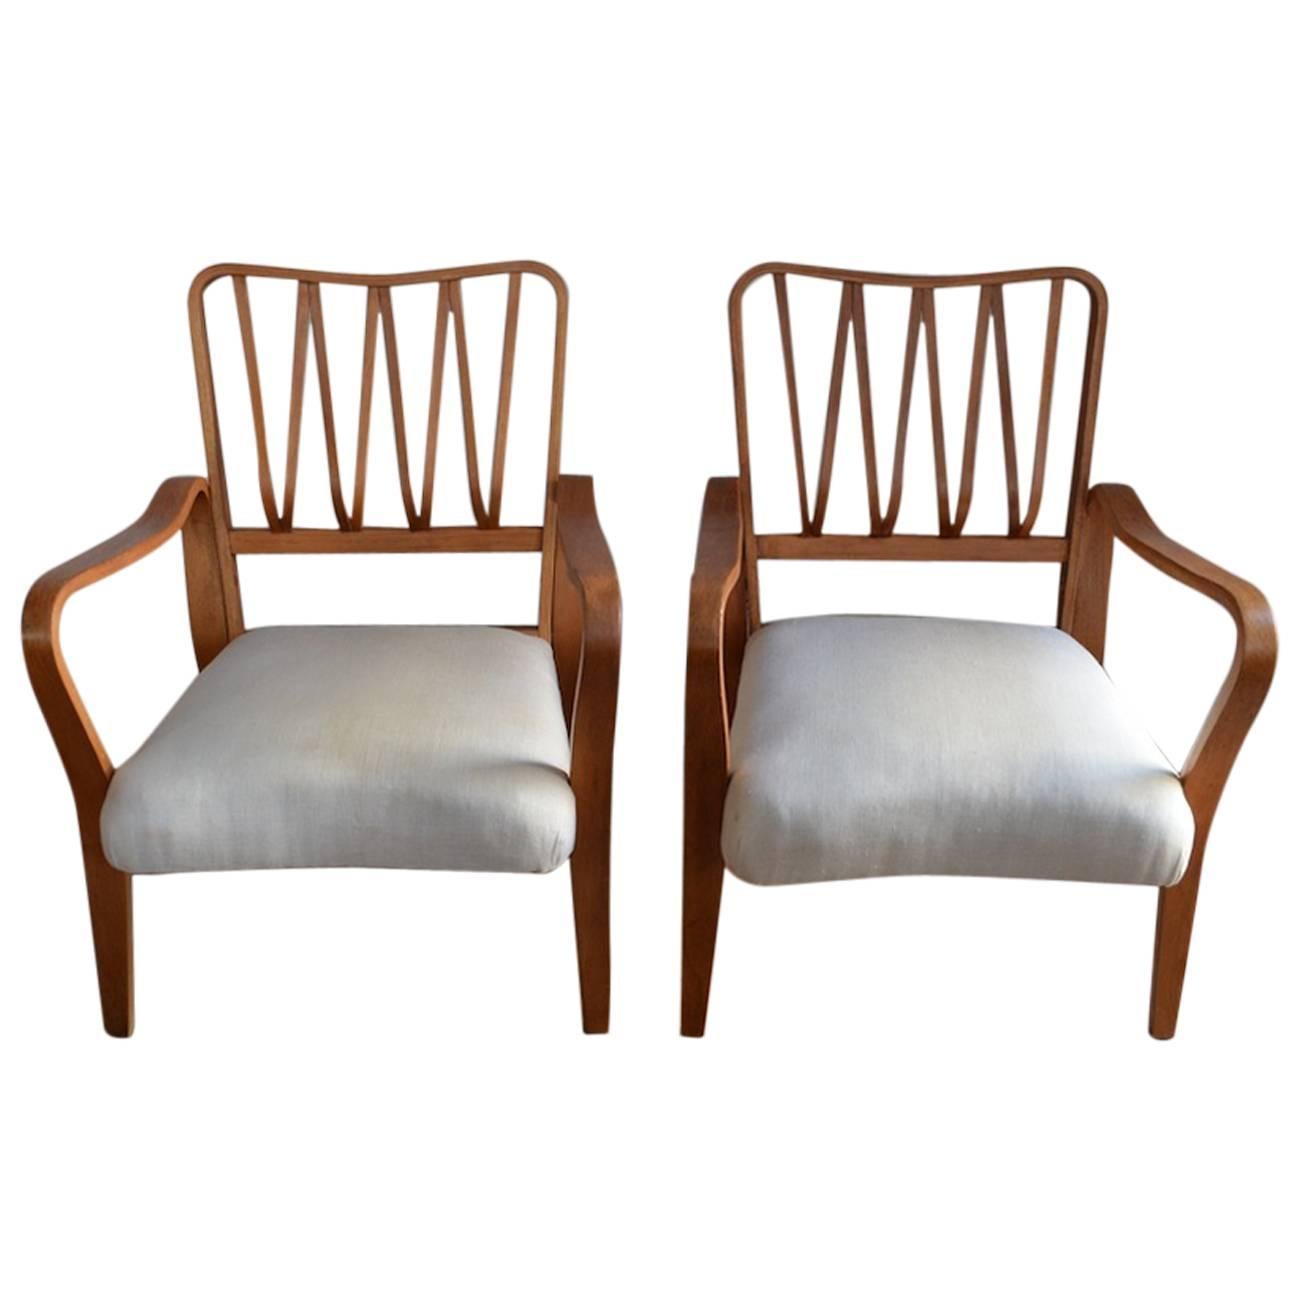 Exceptional Pair of 'Linden' Armchairs by G.A. Jenkins